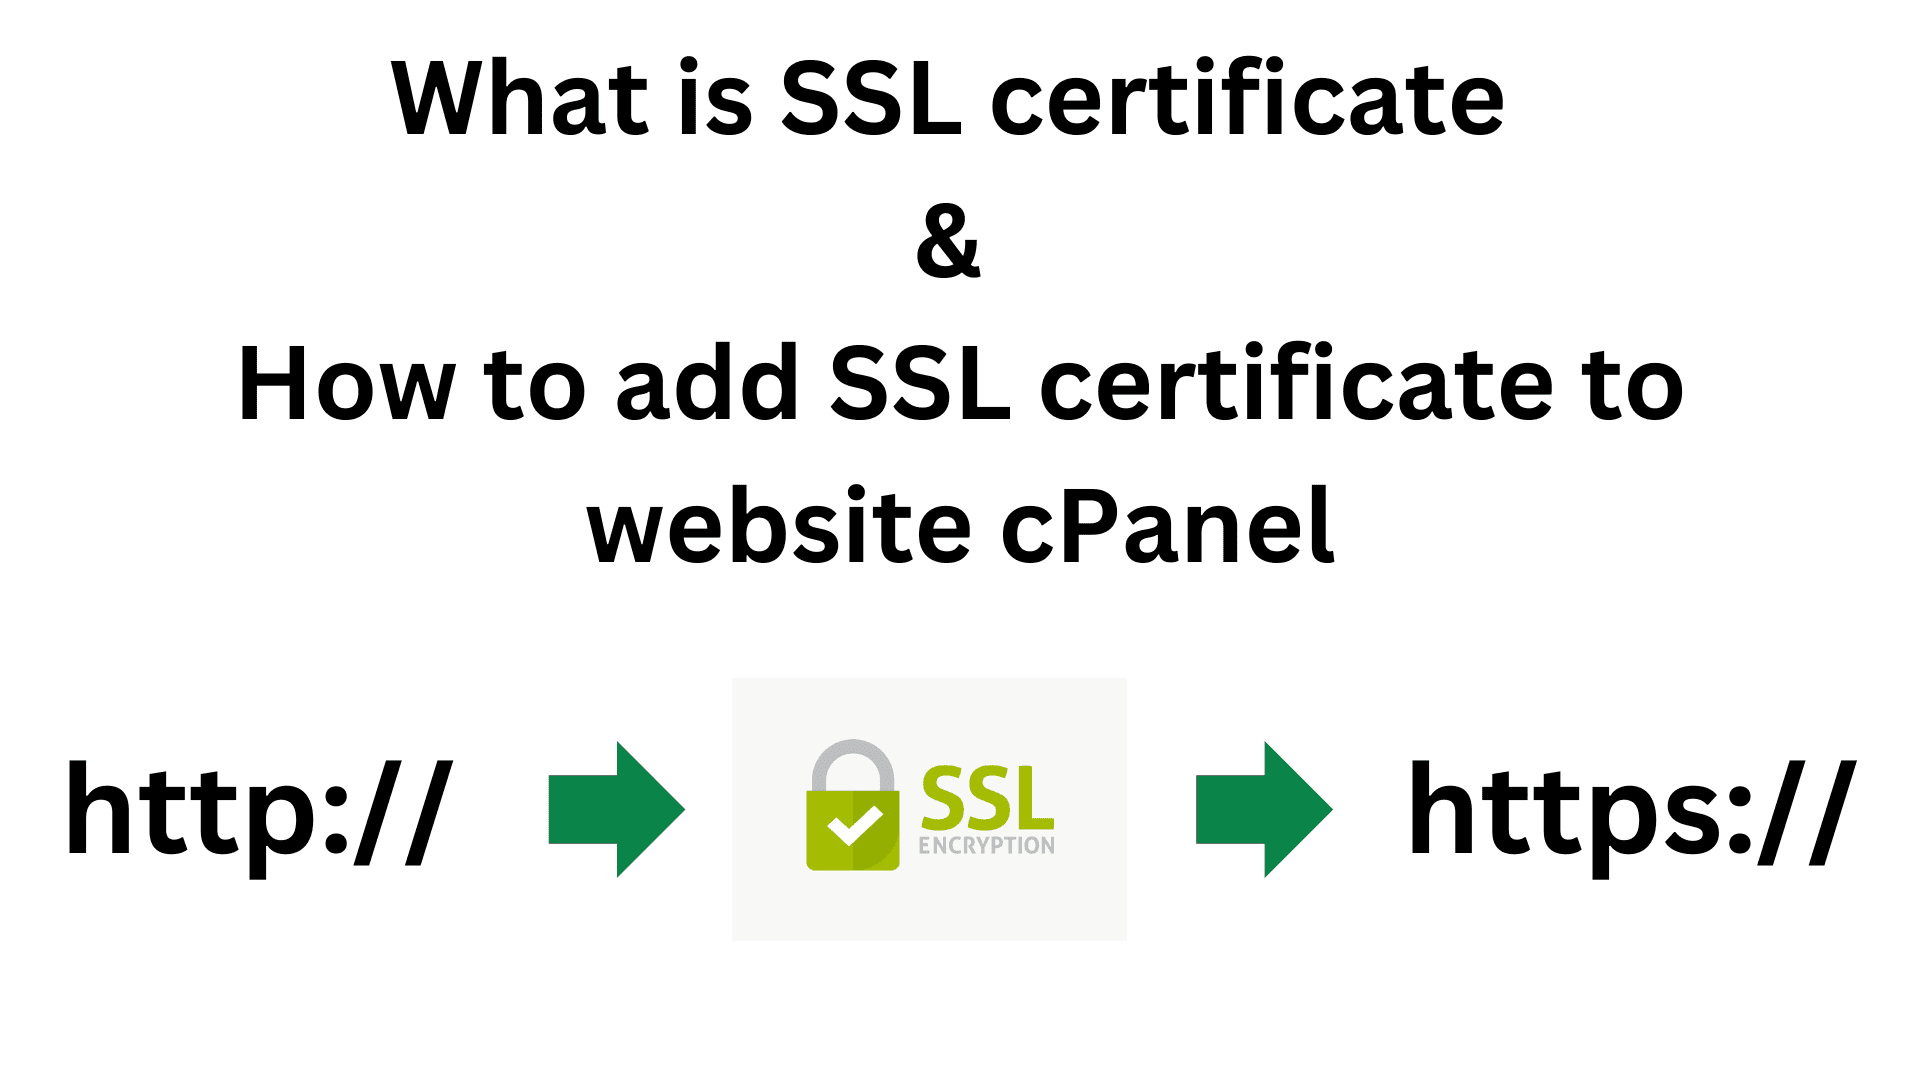 How to add SSL certificate to website in cPanel